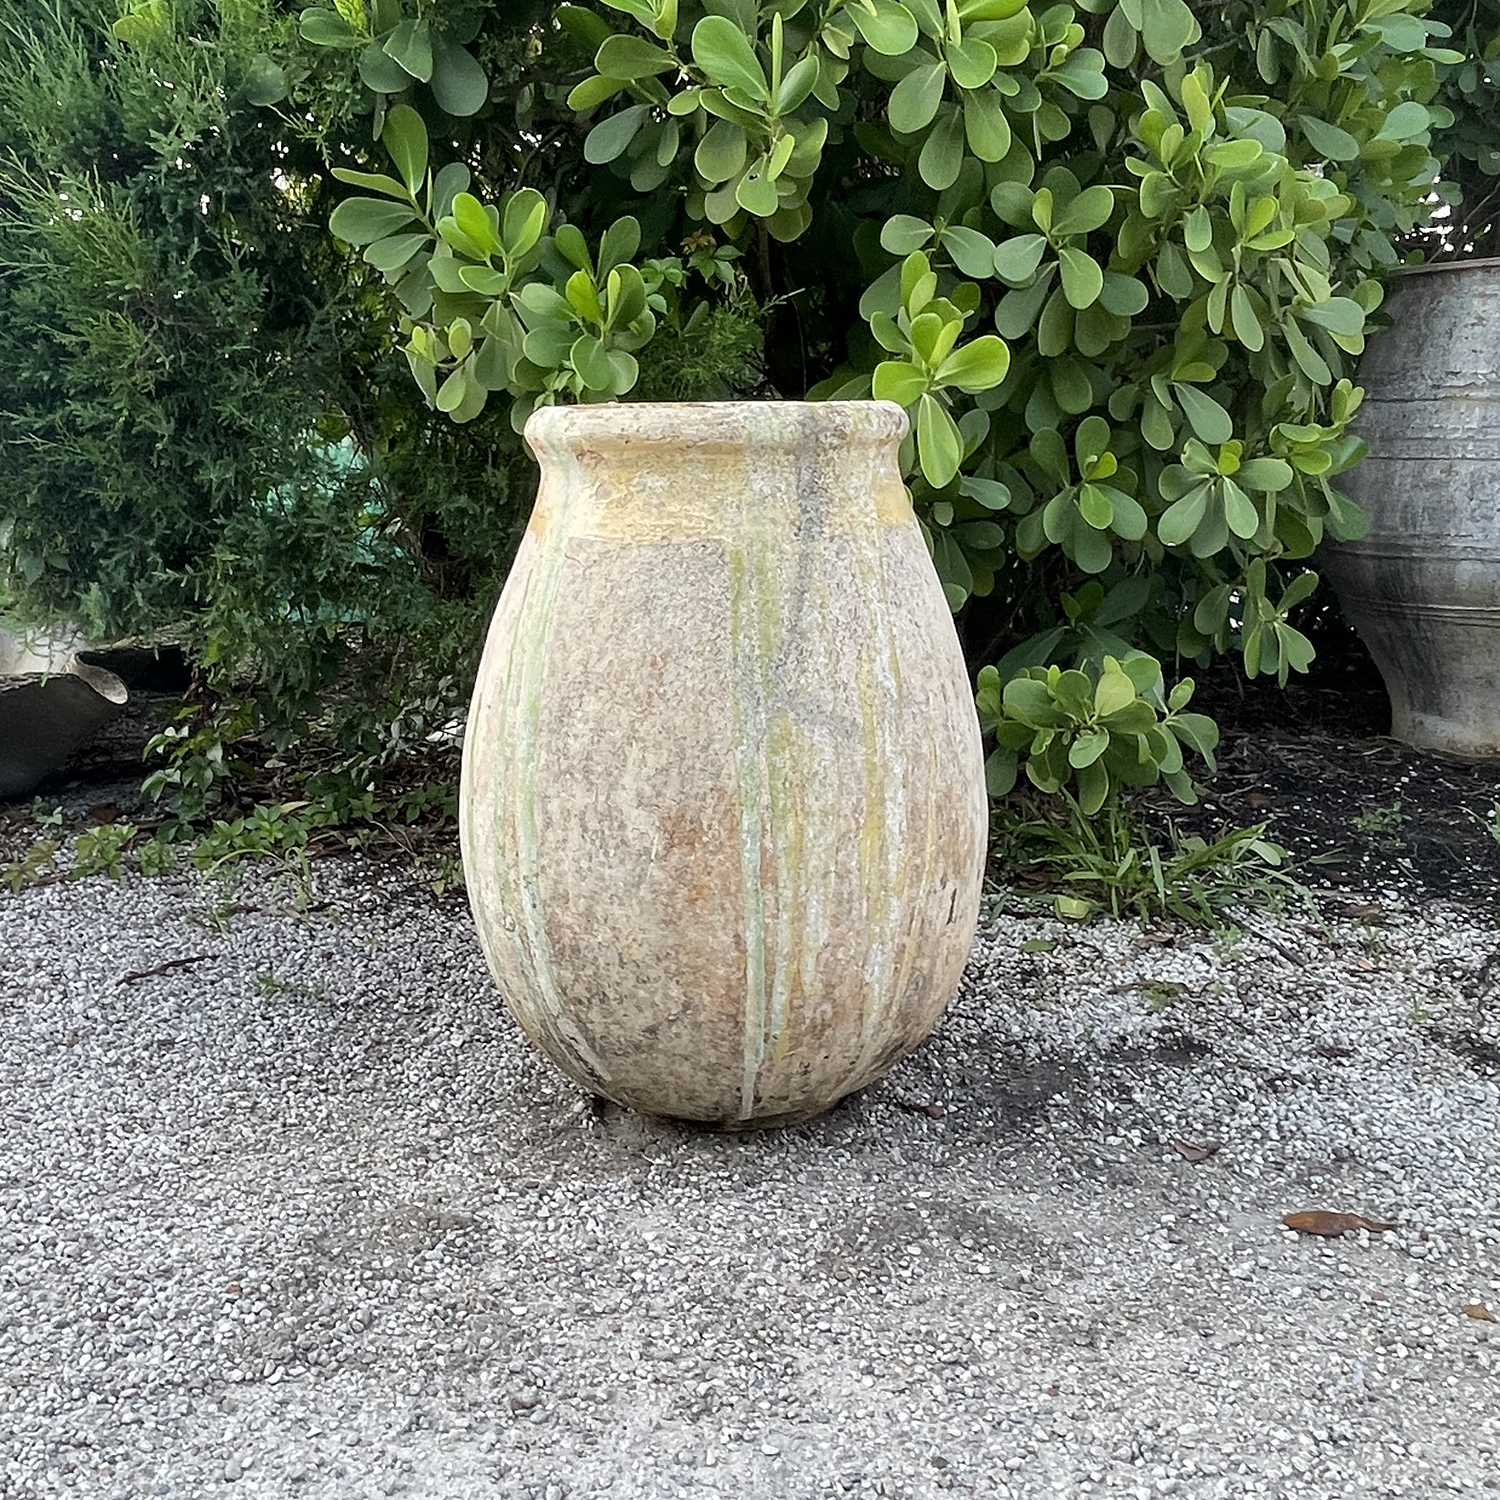 Terracotta Biot Olive Jar 19th Century from Provence